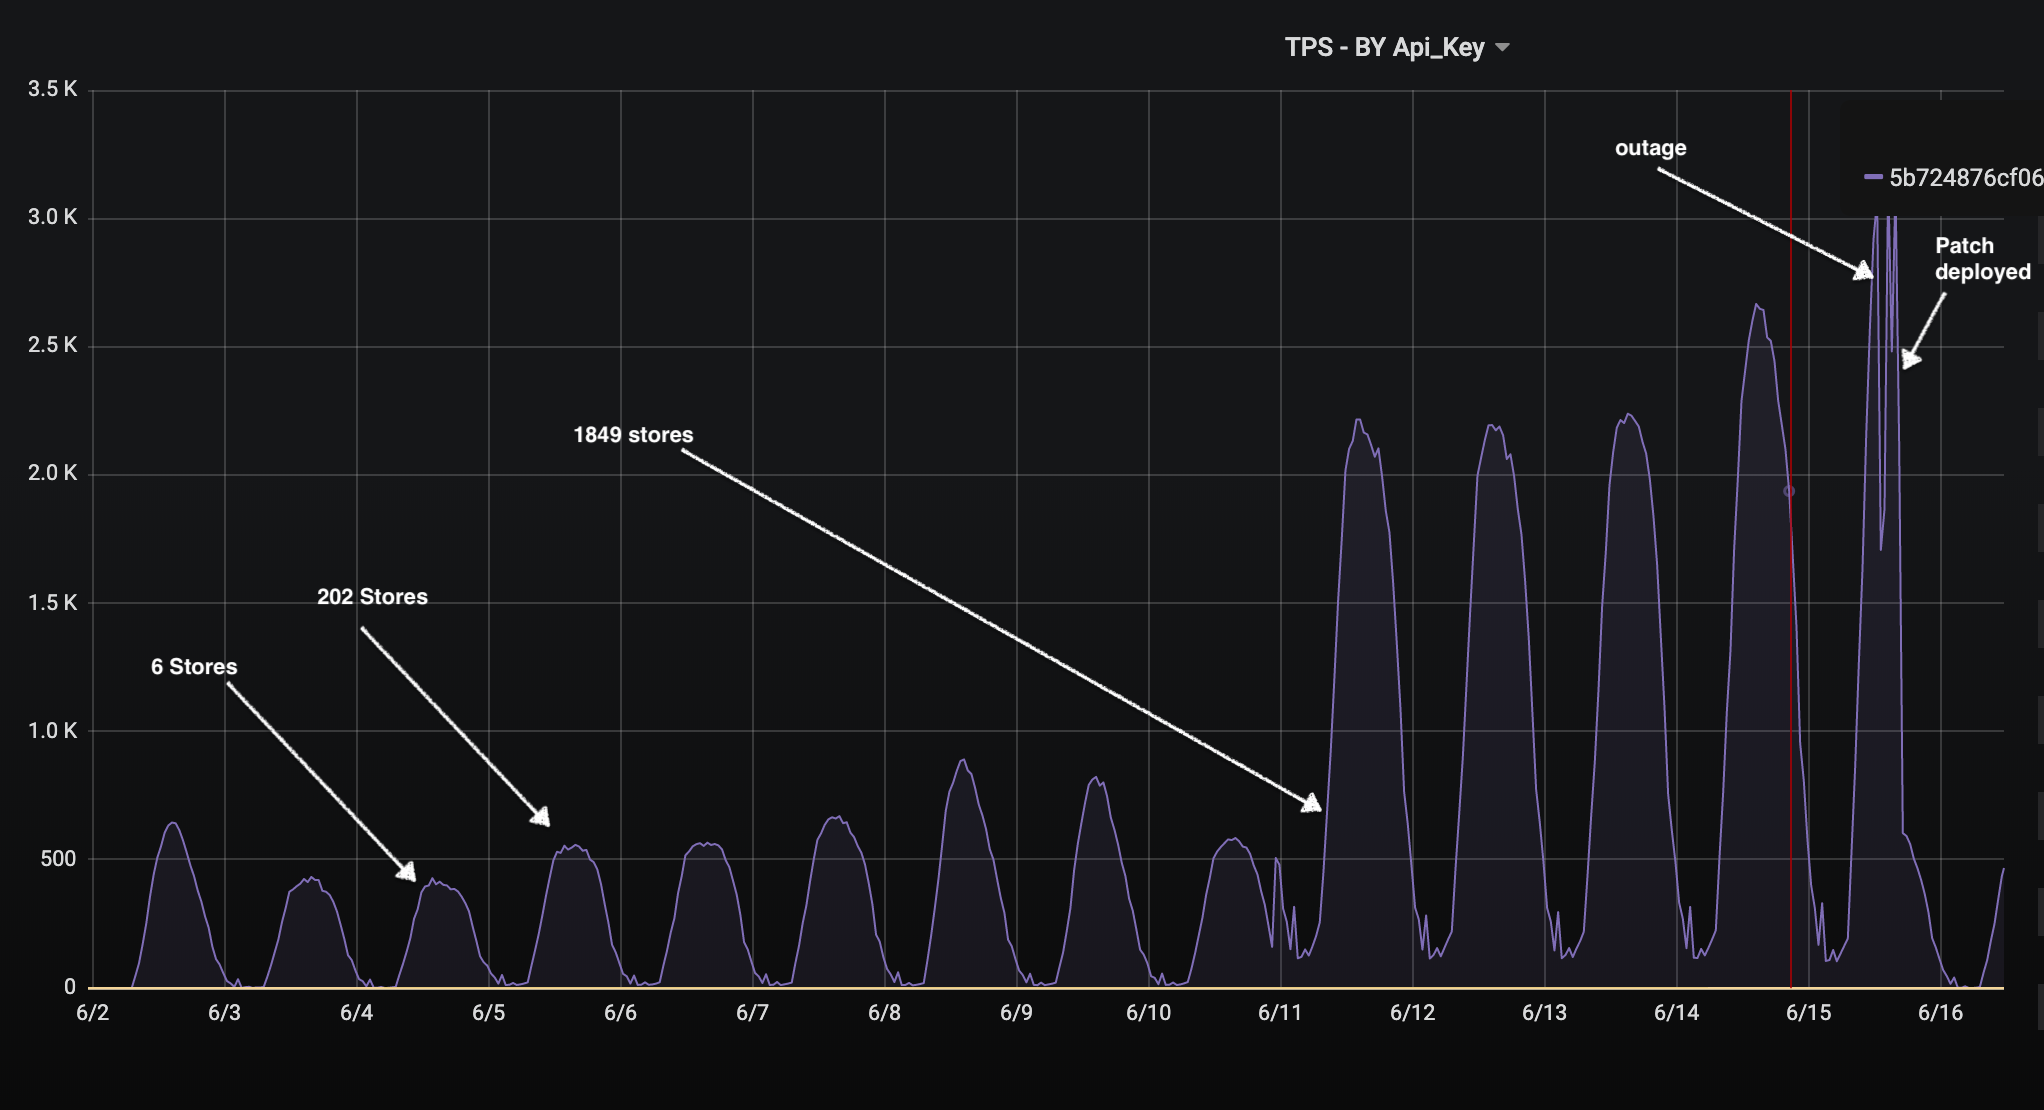 proxy traffic chart: Y-axis showing number of pings to the data centers from 0 to 3.5K, and X-axis showing dates from 6/3-6/16. Large spike around 2.2k pings showed starting on 6/11 and continuing to grow through 6/15 